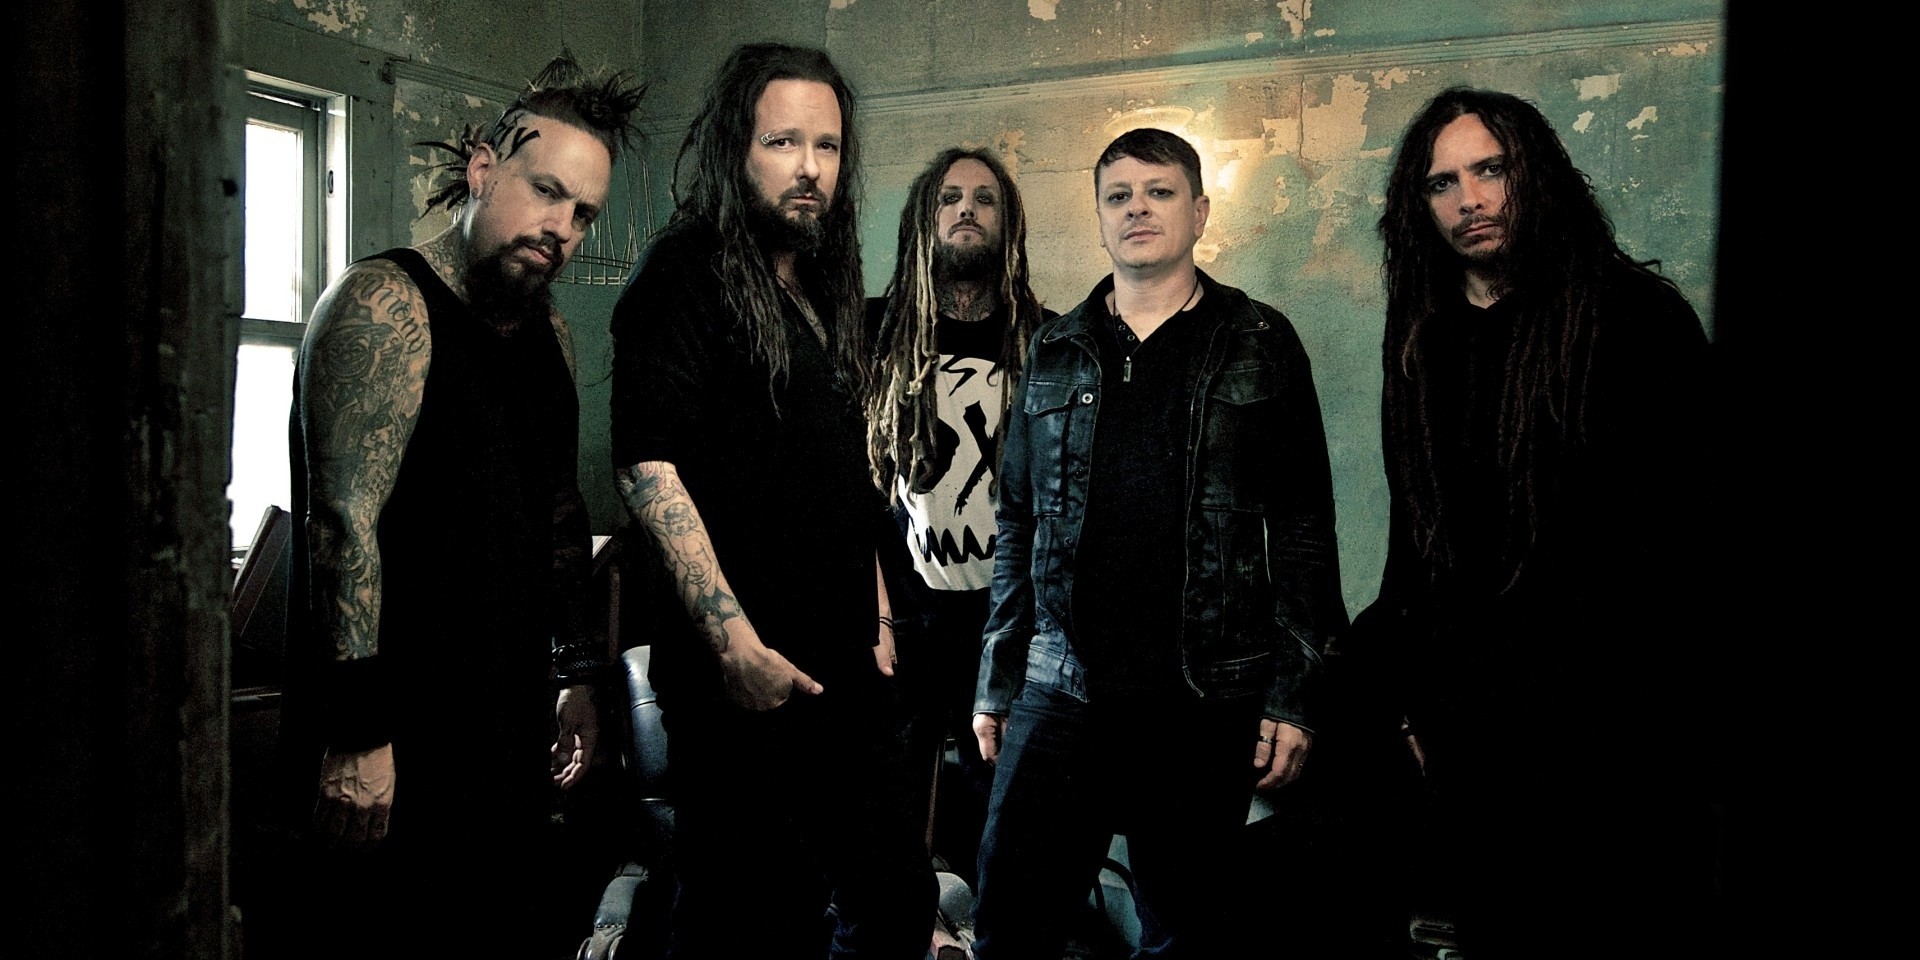 KoRn launches its own brand of coffee, KoRn Koffee